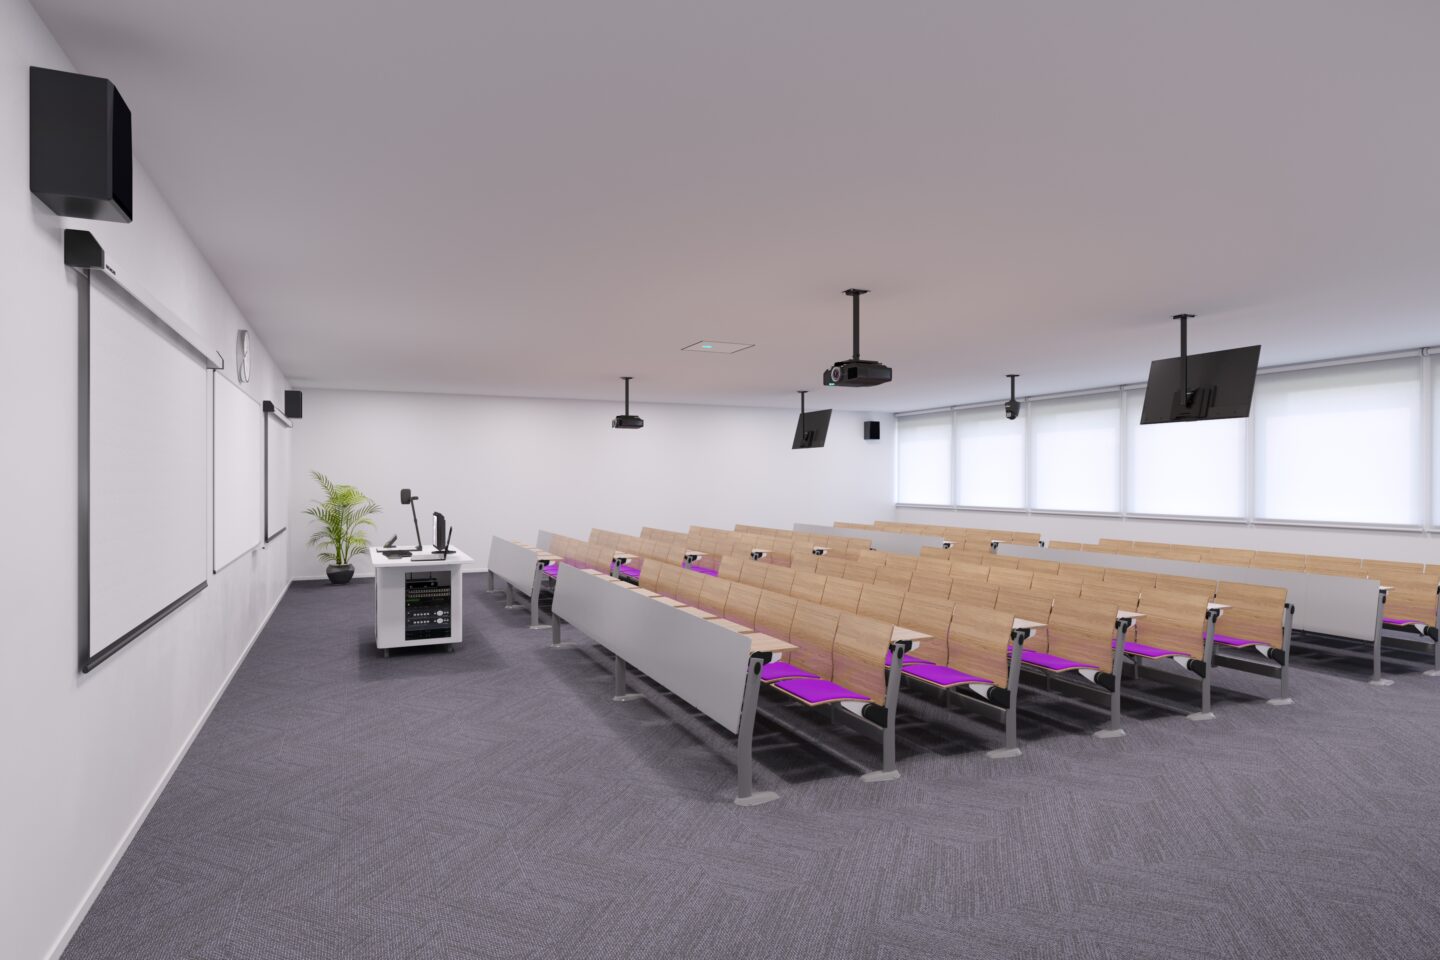 A lecture hall in which Kramer AV products are installed